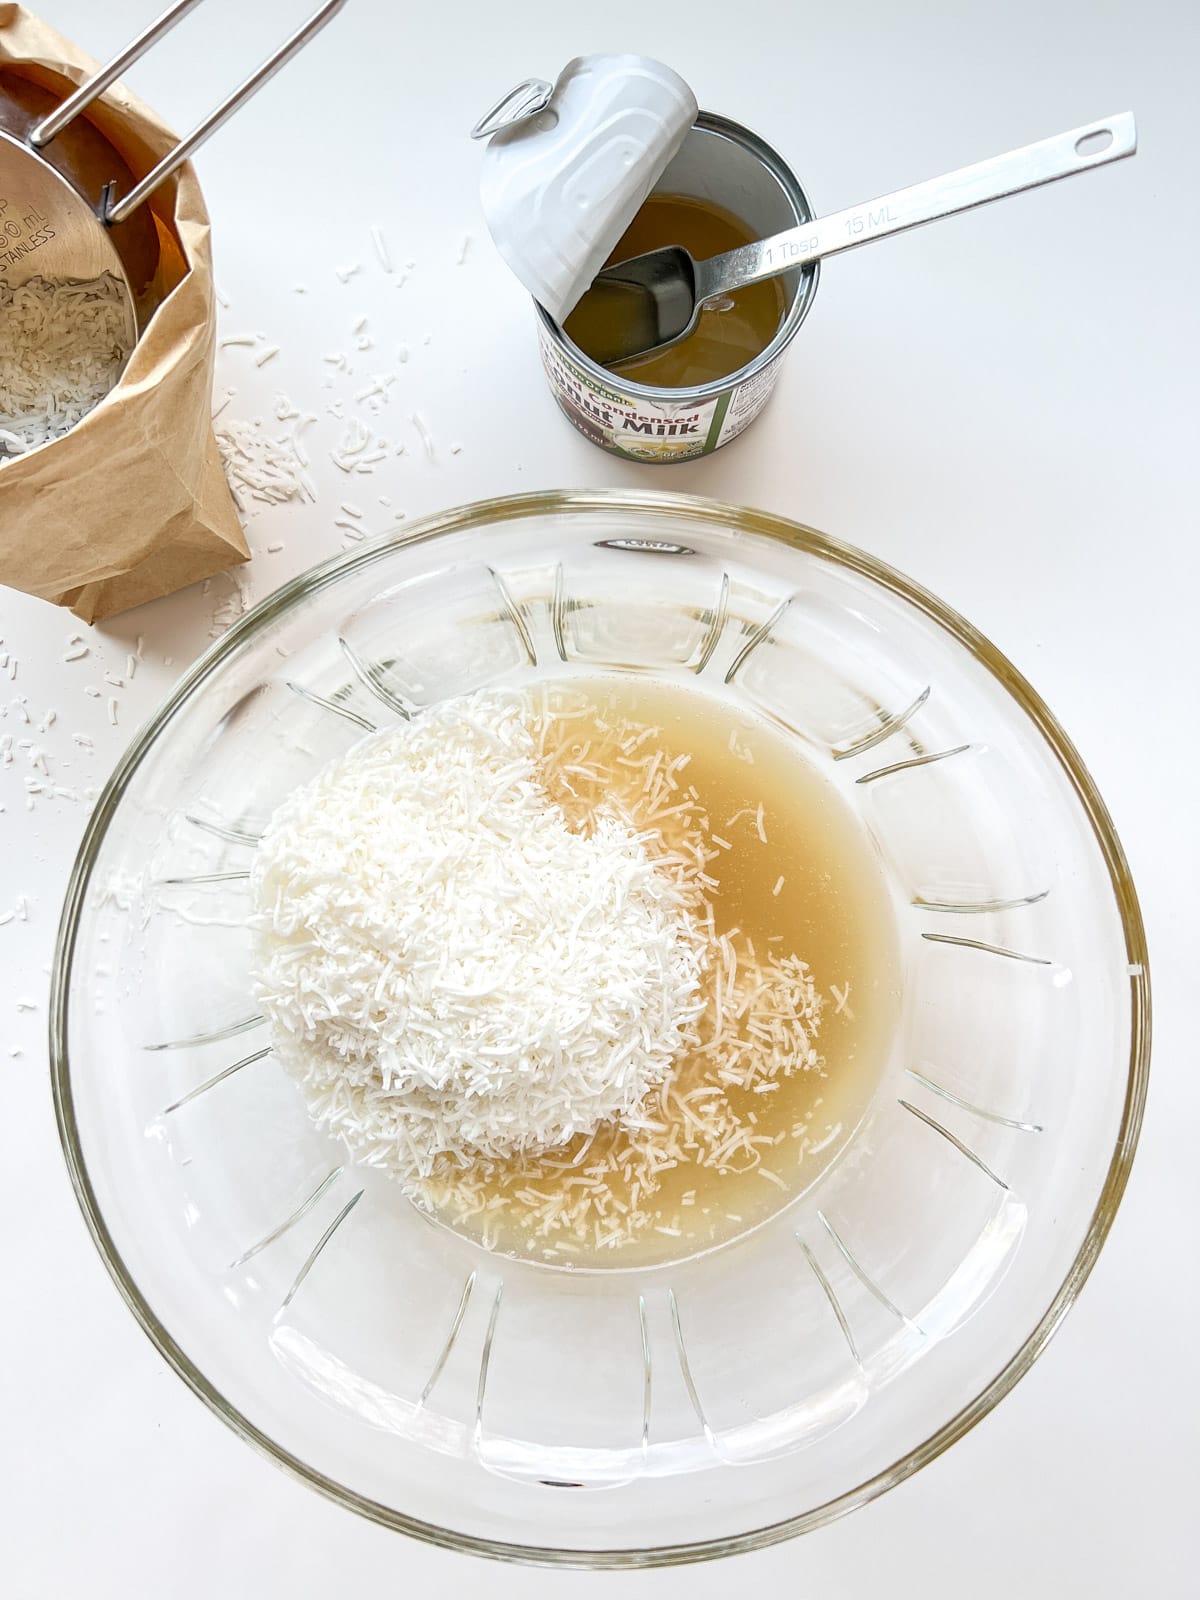 An image of the first step of making Chocolate Coconut Bites, showing a glass bowl containing the coconut and the condensed milk.